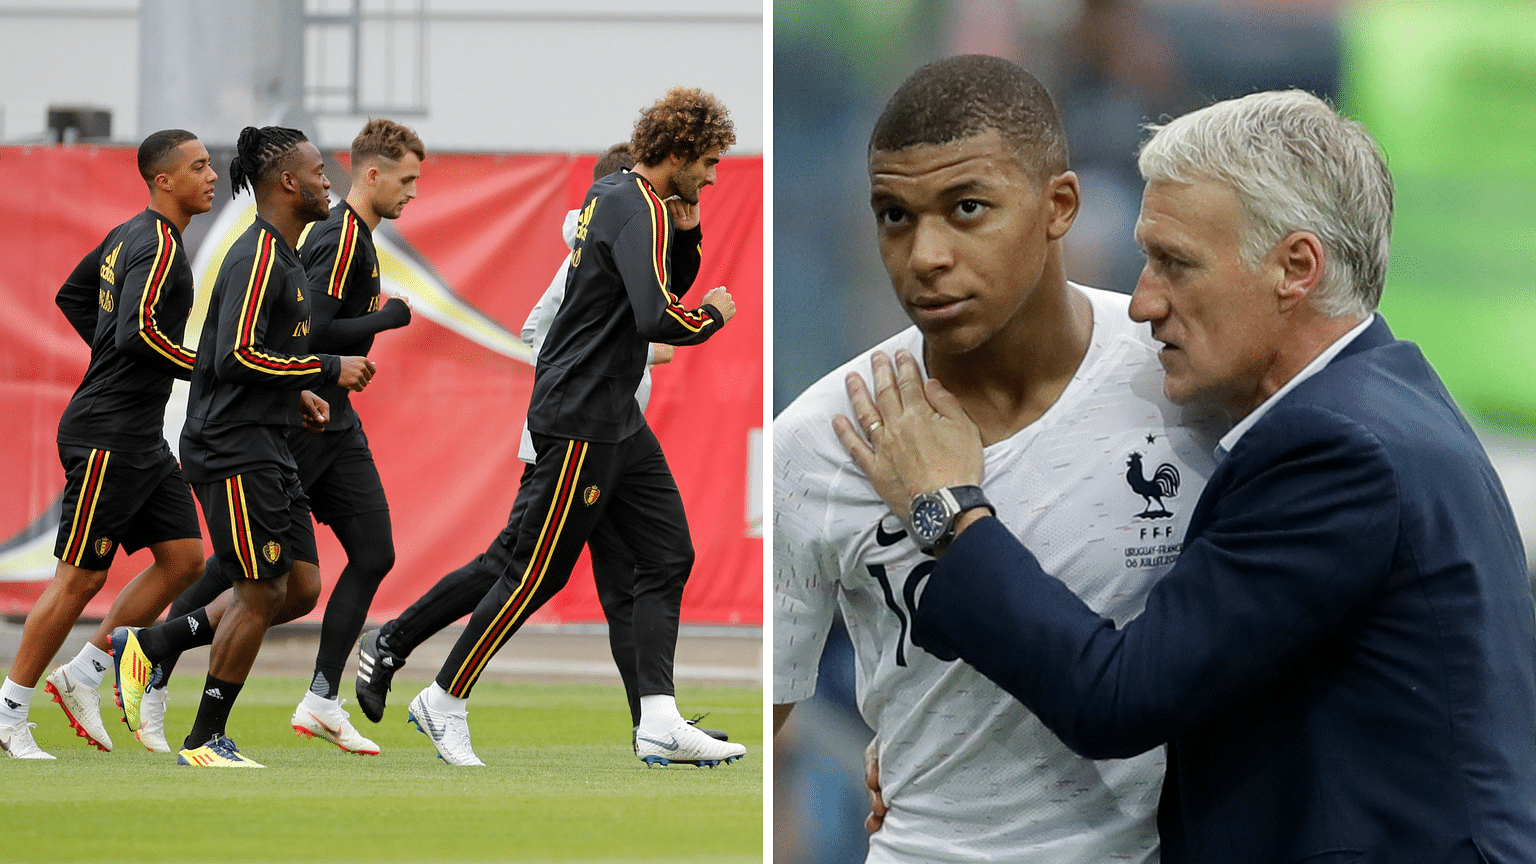 Belgium team training ahead of the first semi-final (left) and file picture of France’s Mbappe and coach Didier Deschamps.